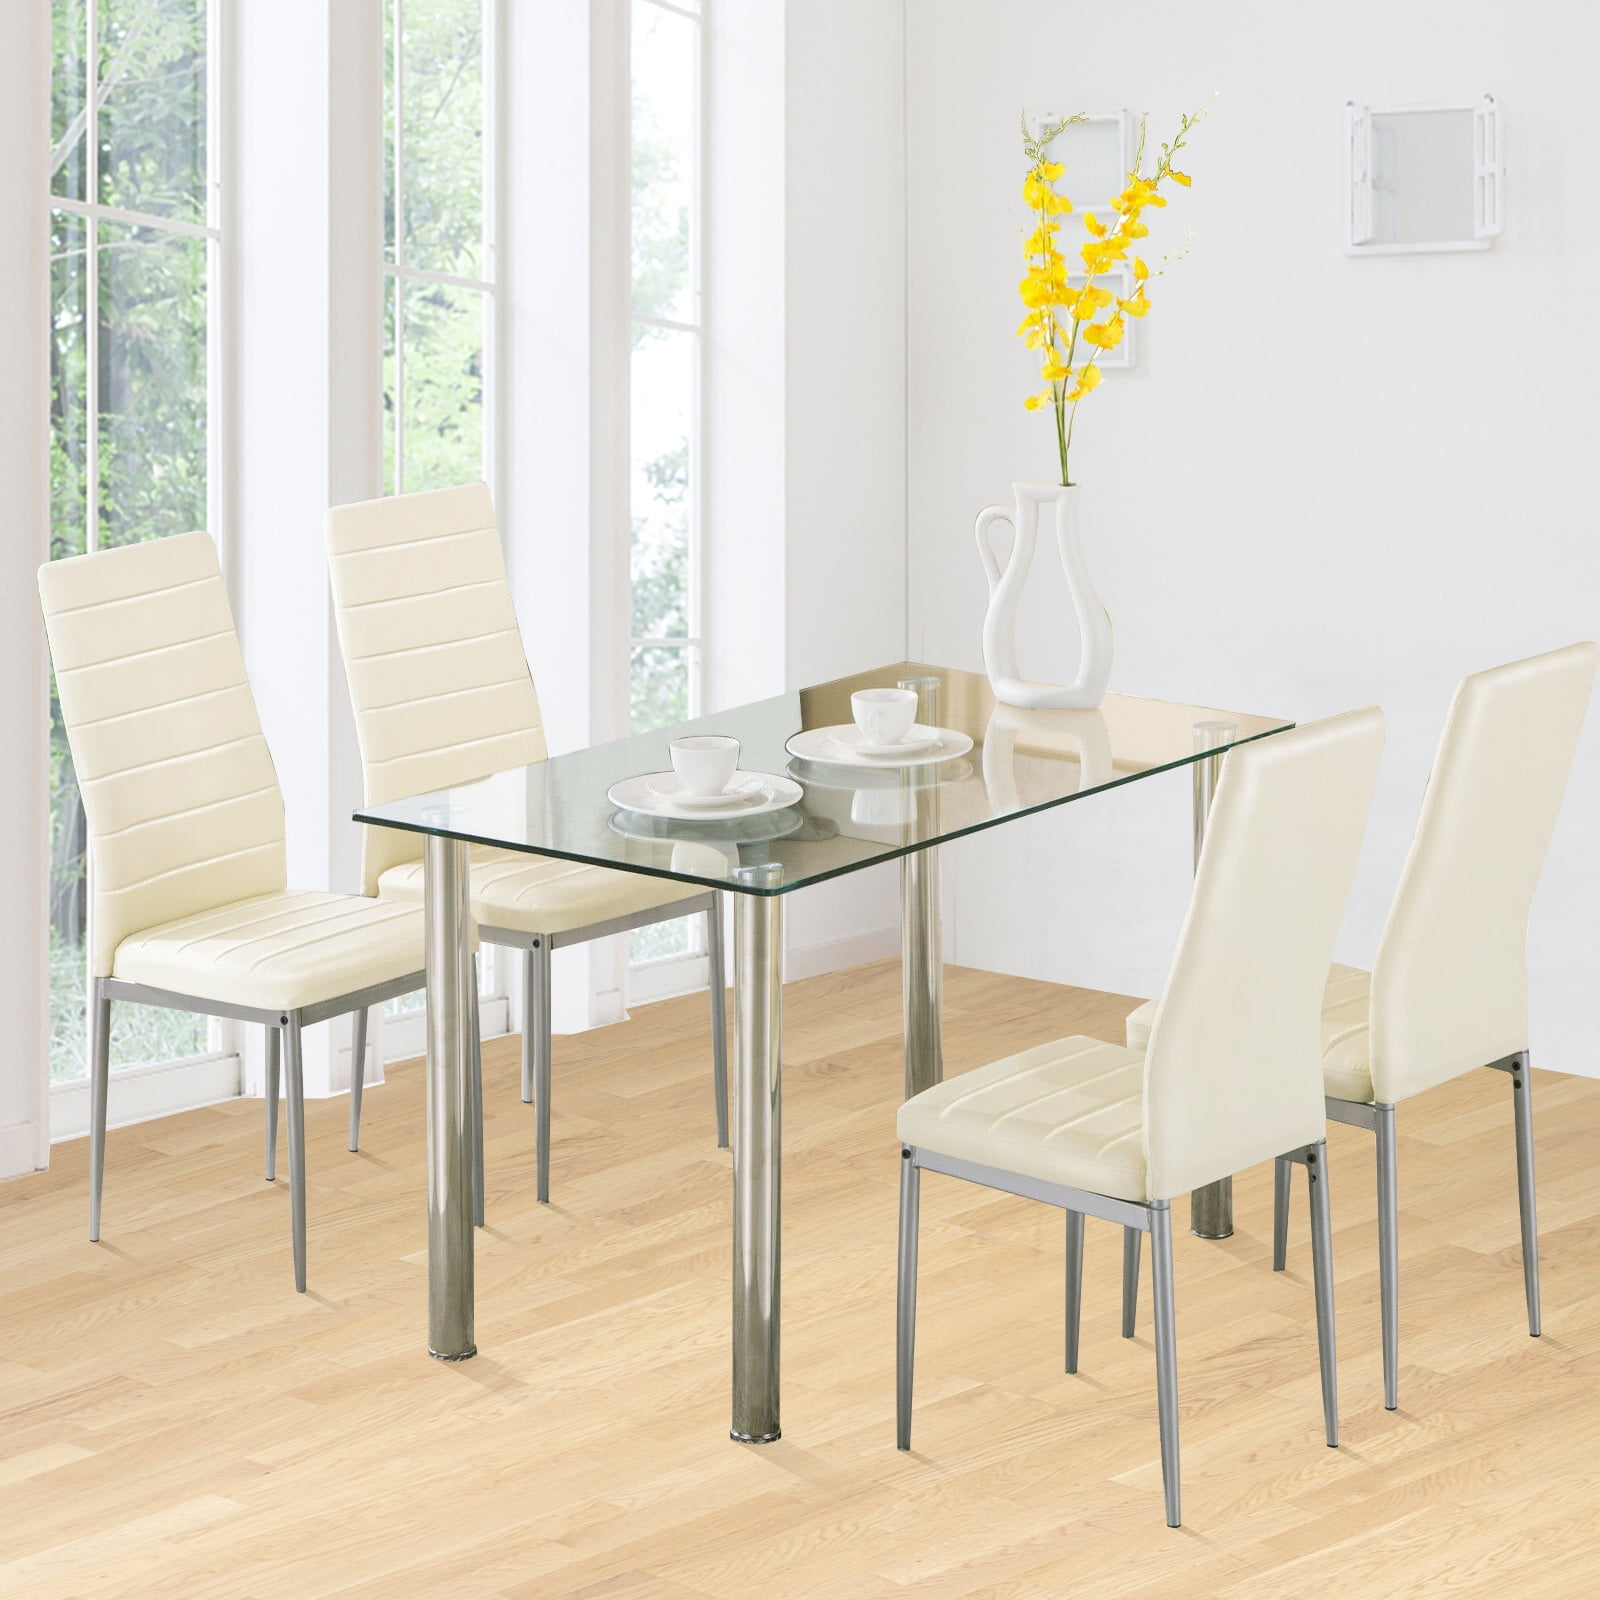 Tempered Round Glass Dining Table Cross Legs for 2 or 4 Chairs Kitchen Furniture 